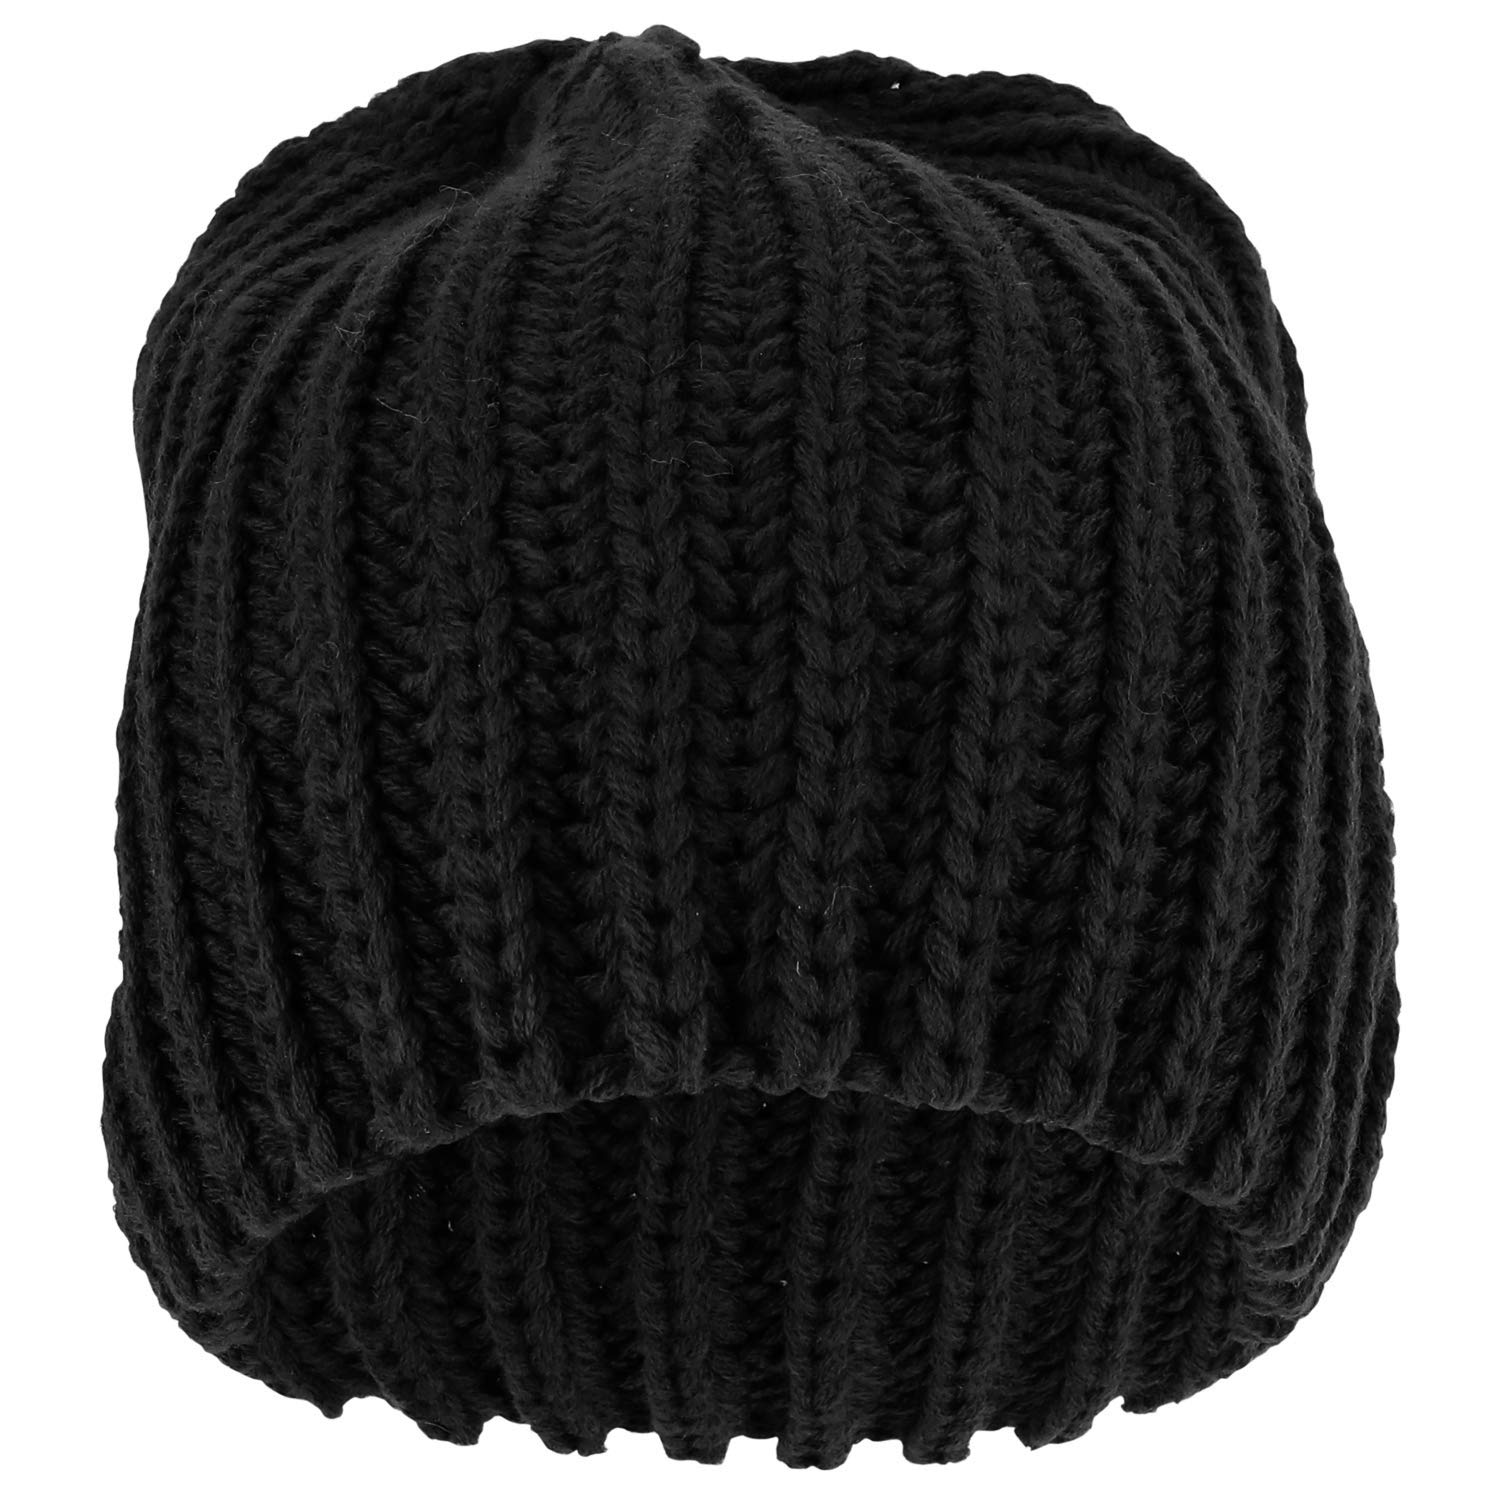 Armycrew Plain Thick Ribbed Winter Slouchy Beanie Hat